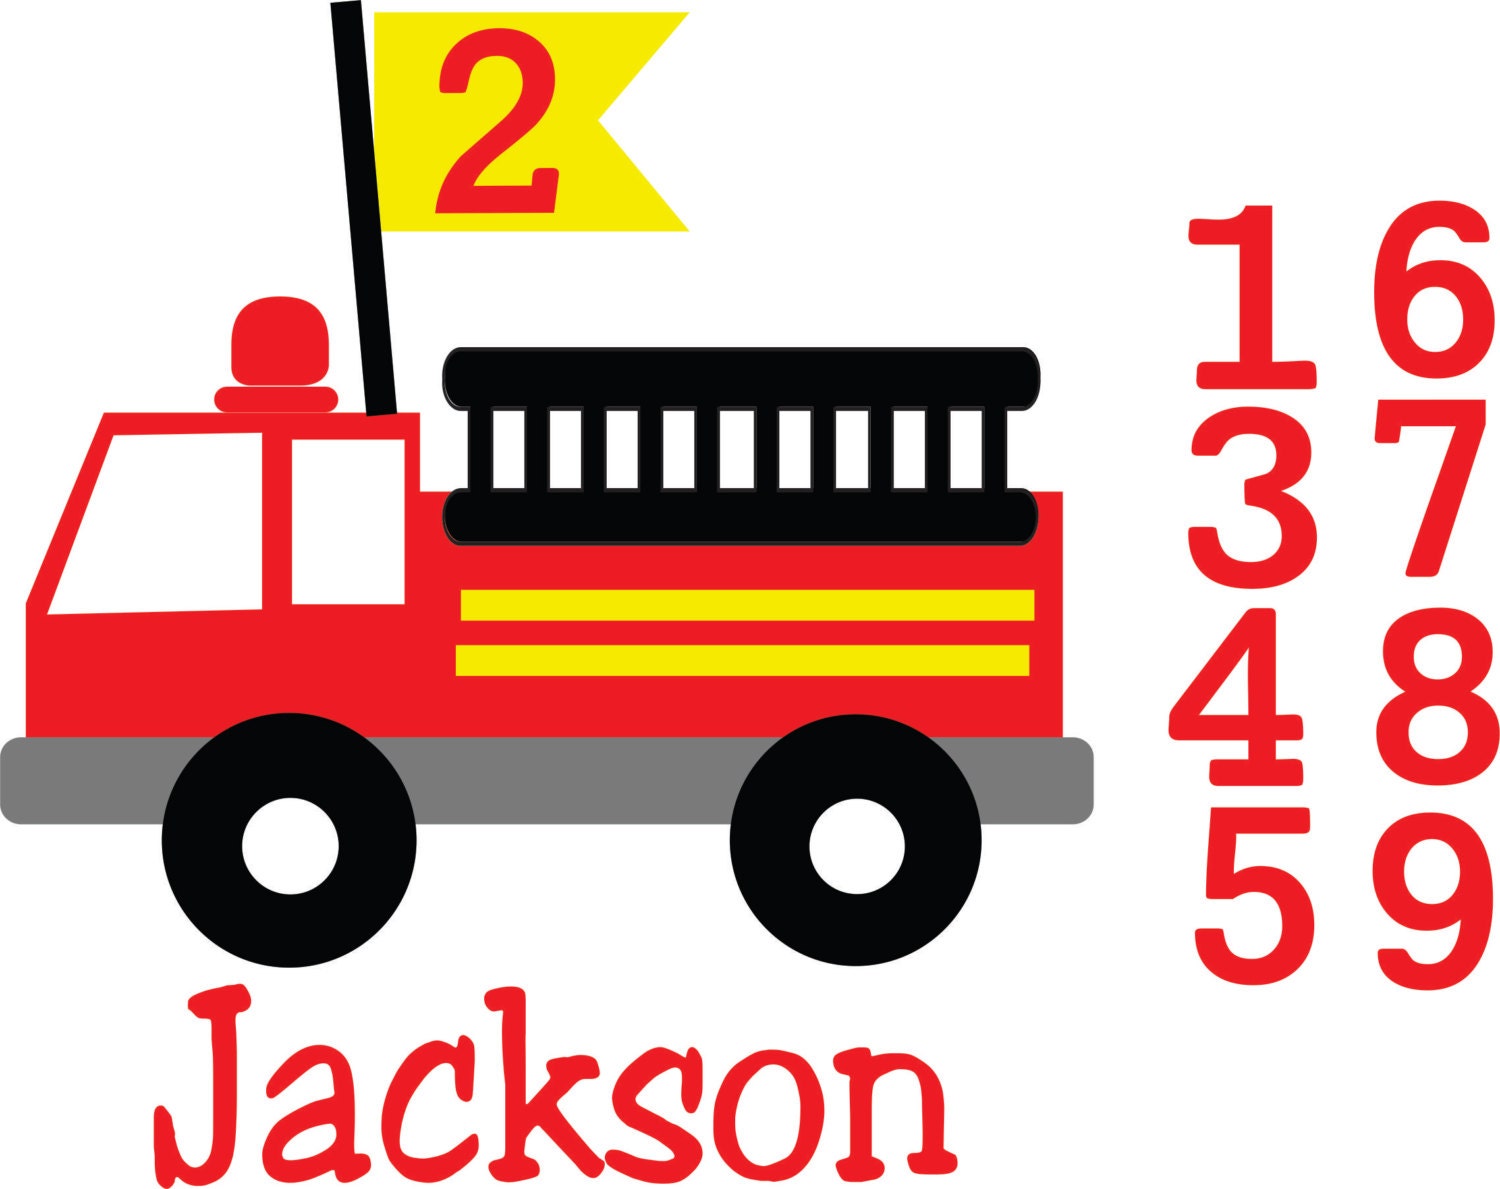 Download Birthday Fire Truck Files .SVG/.EPS Files